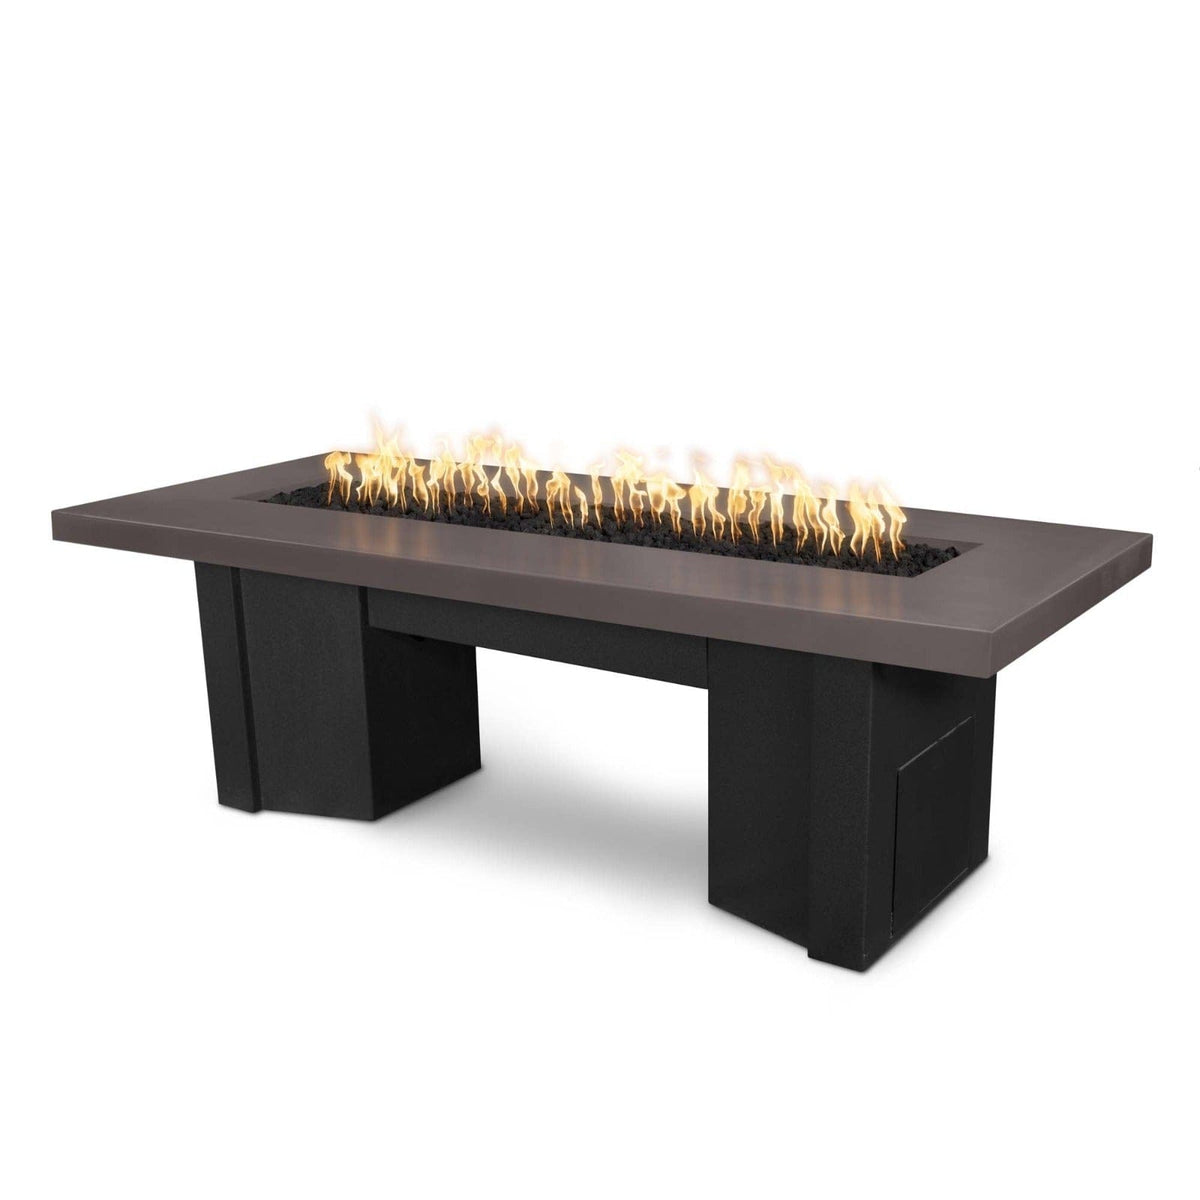 The Outdoor Plus Fire Features Chestnut (-CST) / Black Powder Coated Steel (-BLK) The Outdoor Plus 78&quot; Alameda Fire Table Smooth Concrete in Natural Gas - Flame Sense System with Push Button Spark Igniter / OPT-ALMGFRC78FSEN-NG